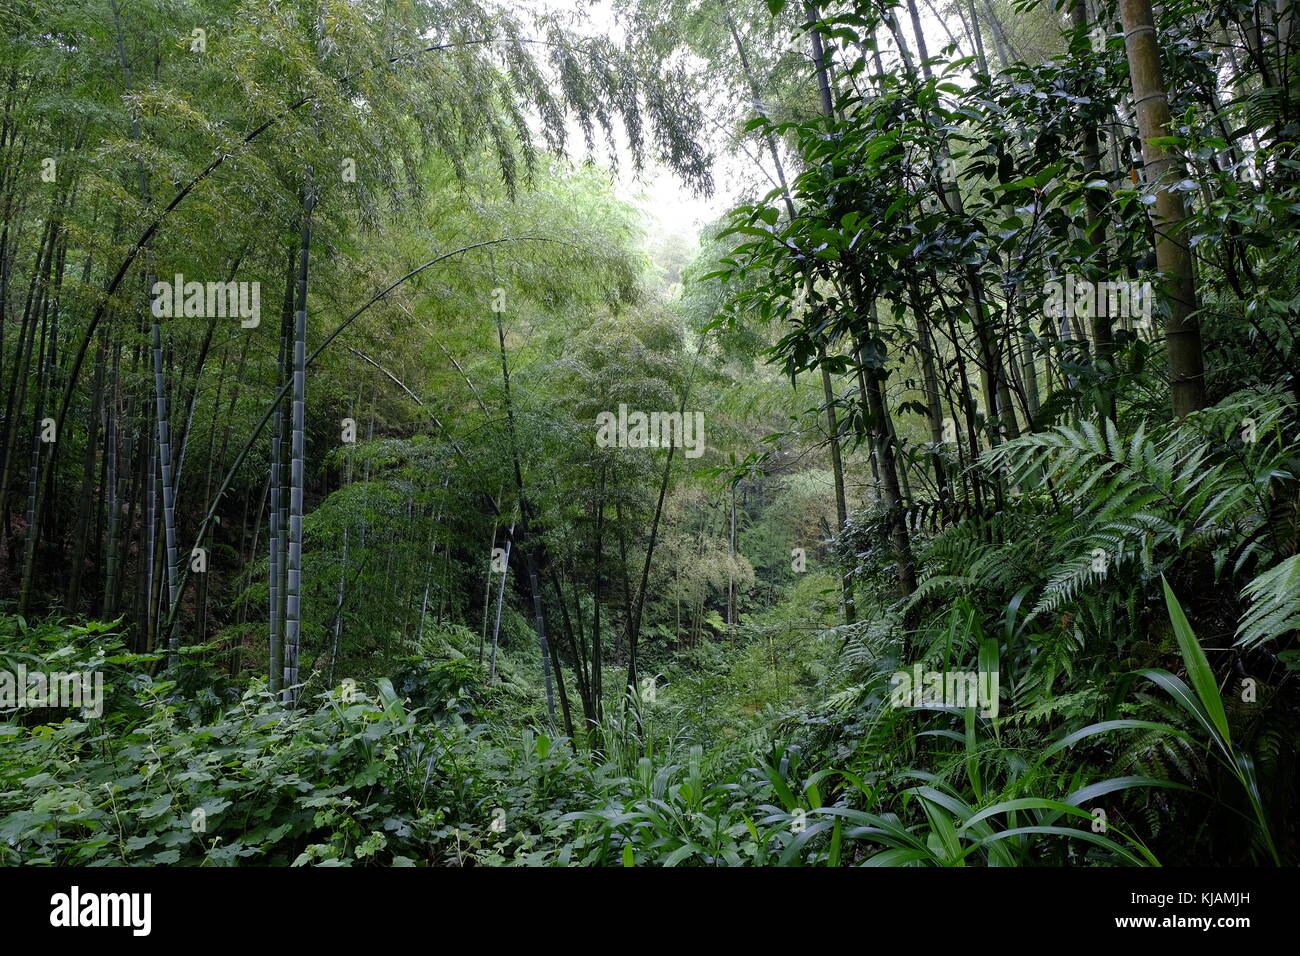 Deep green bamboo forest at the Shunan Bamboo Forest in Sichuan province at China Stock Photo